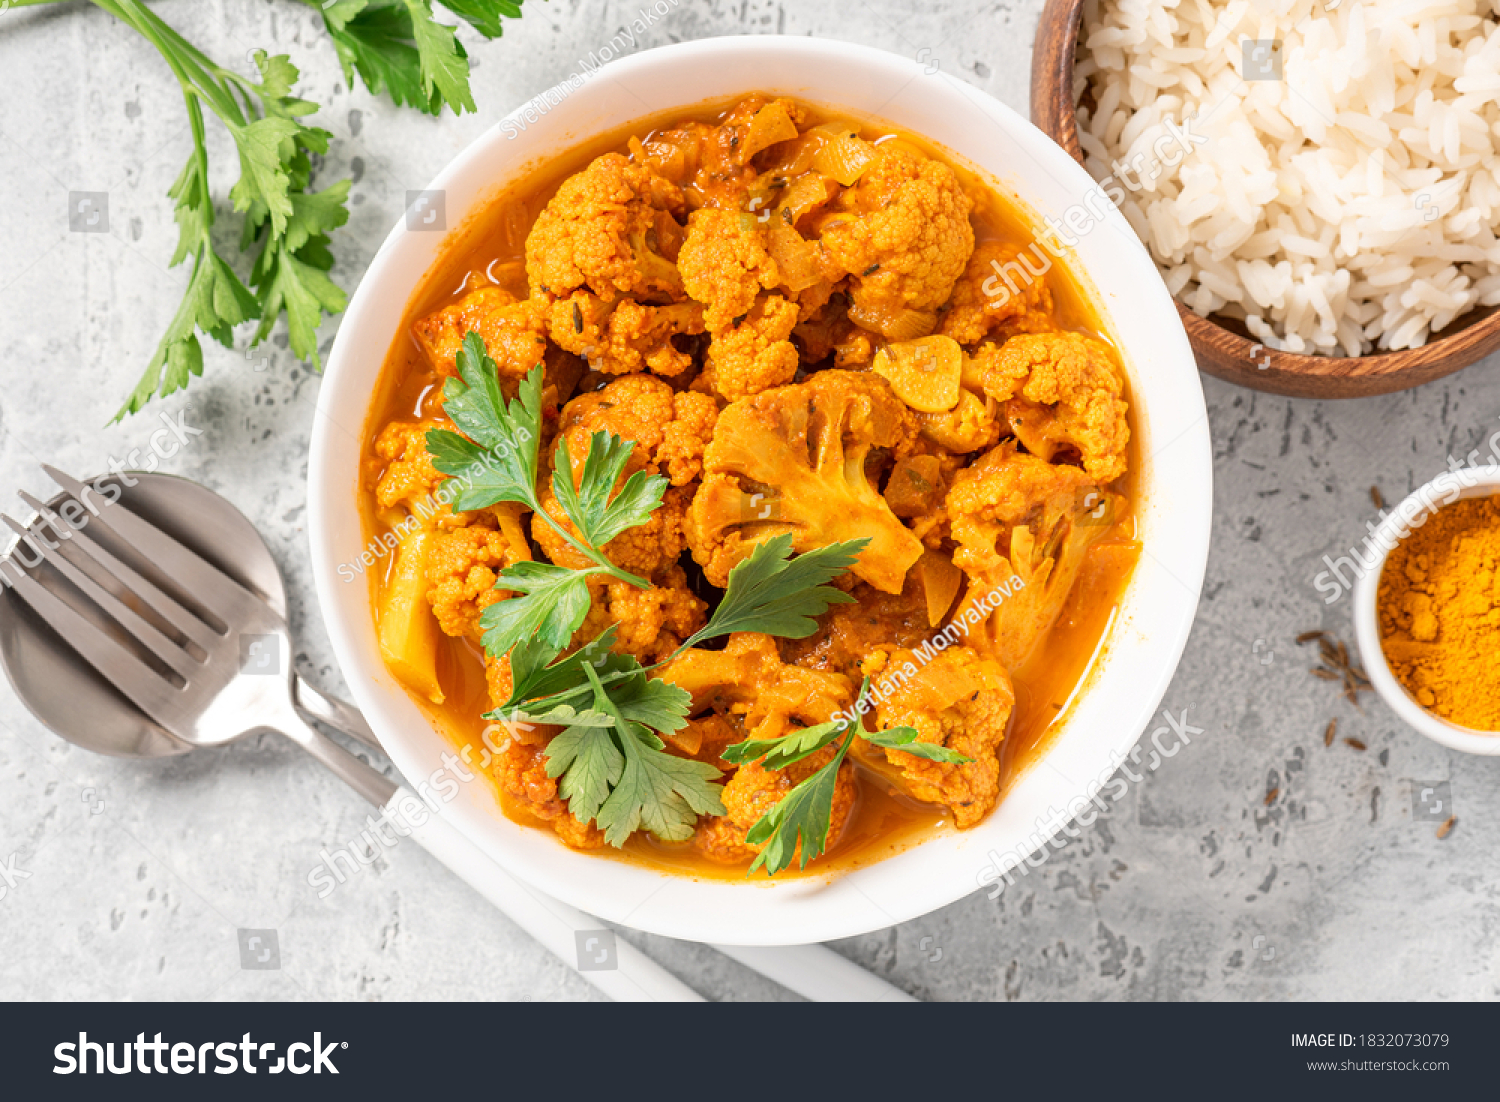 Cauliflower stew with curry, cumin, turmeric and other spices in a white bowl on a grey concrete background top view. Curry roasted cauliflower. #1832073079